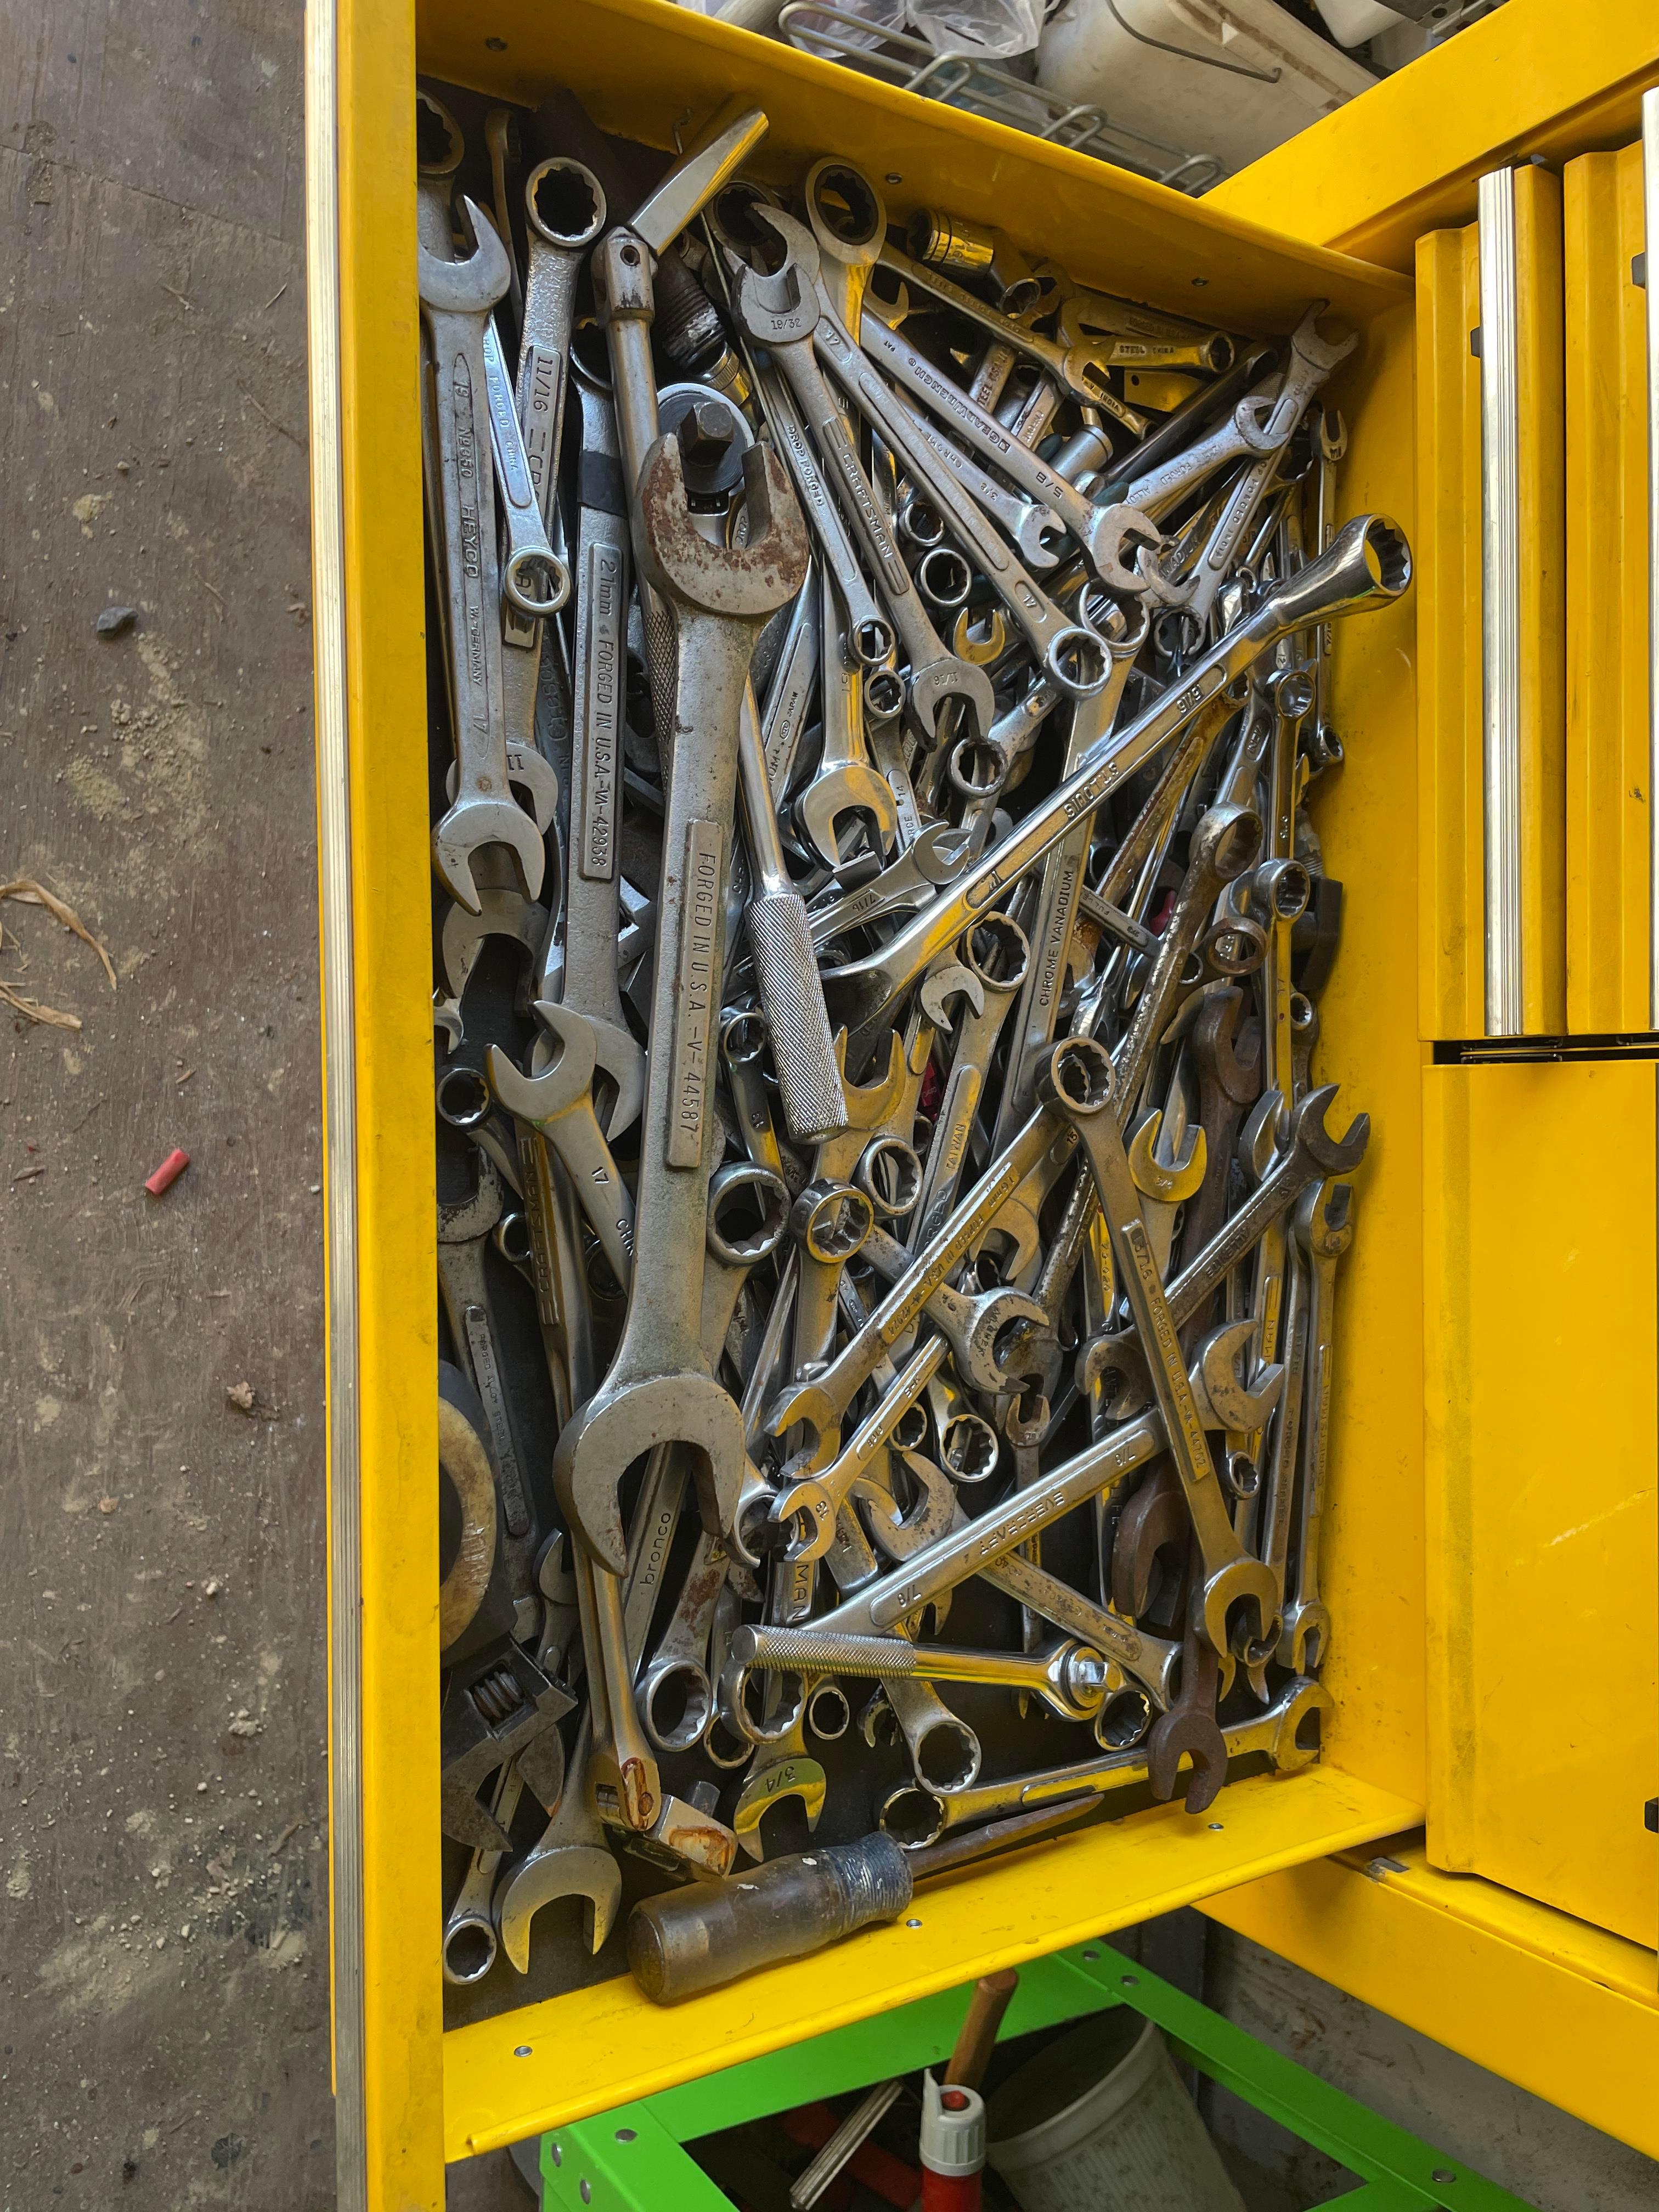 US General Port 5 Drawer Tool Box, Contents Included (Yellow)